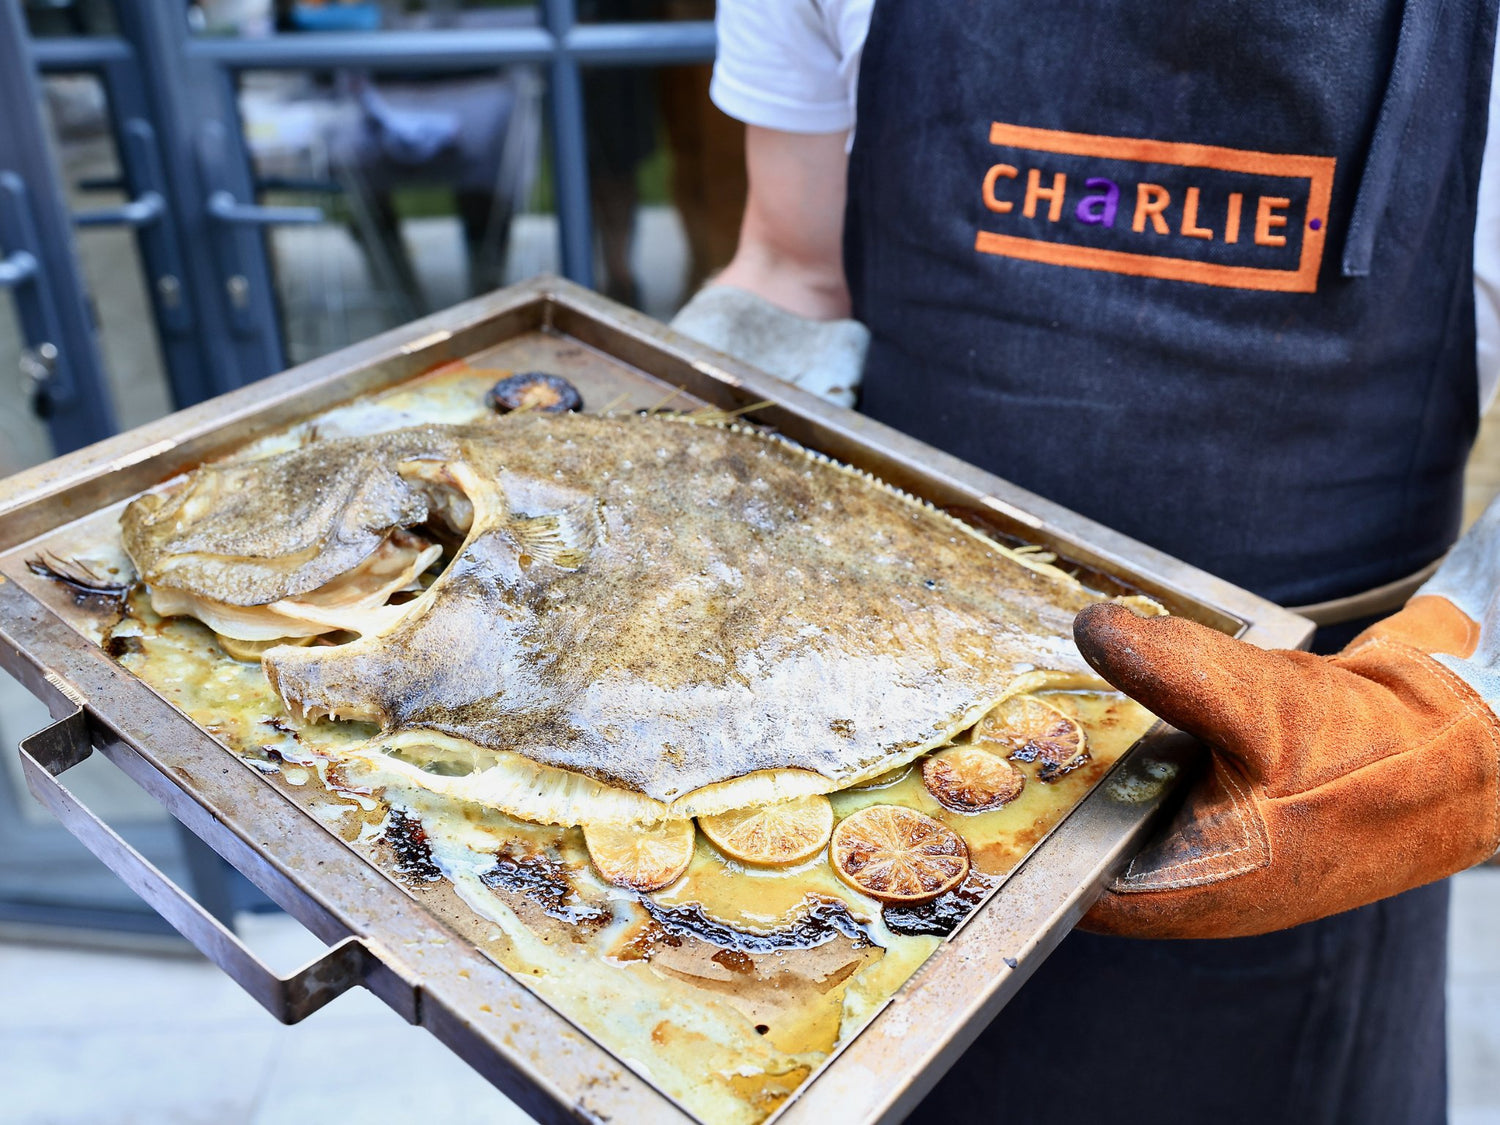 Whole Wood Fired Turbot with Lime, Thyme, And Hazelnut Vinaigrette by Chef Bart Van Der Lee. - Charlie Oven